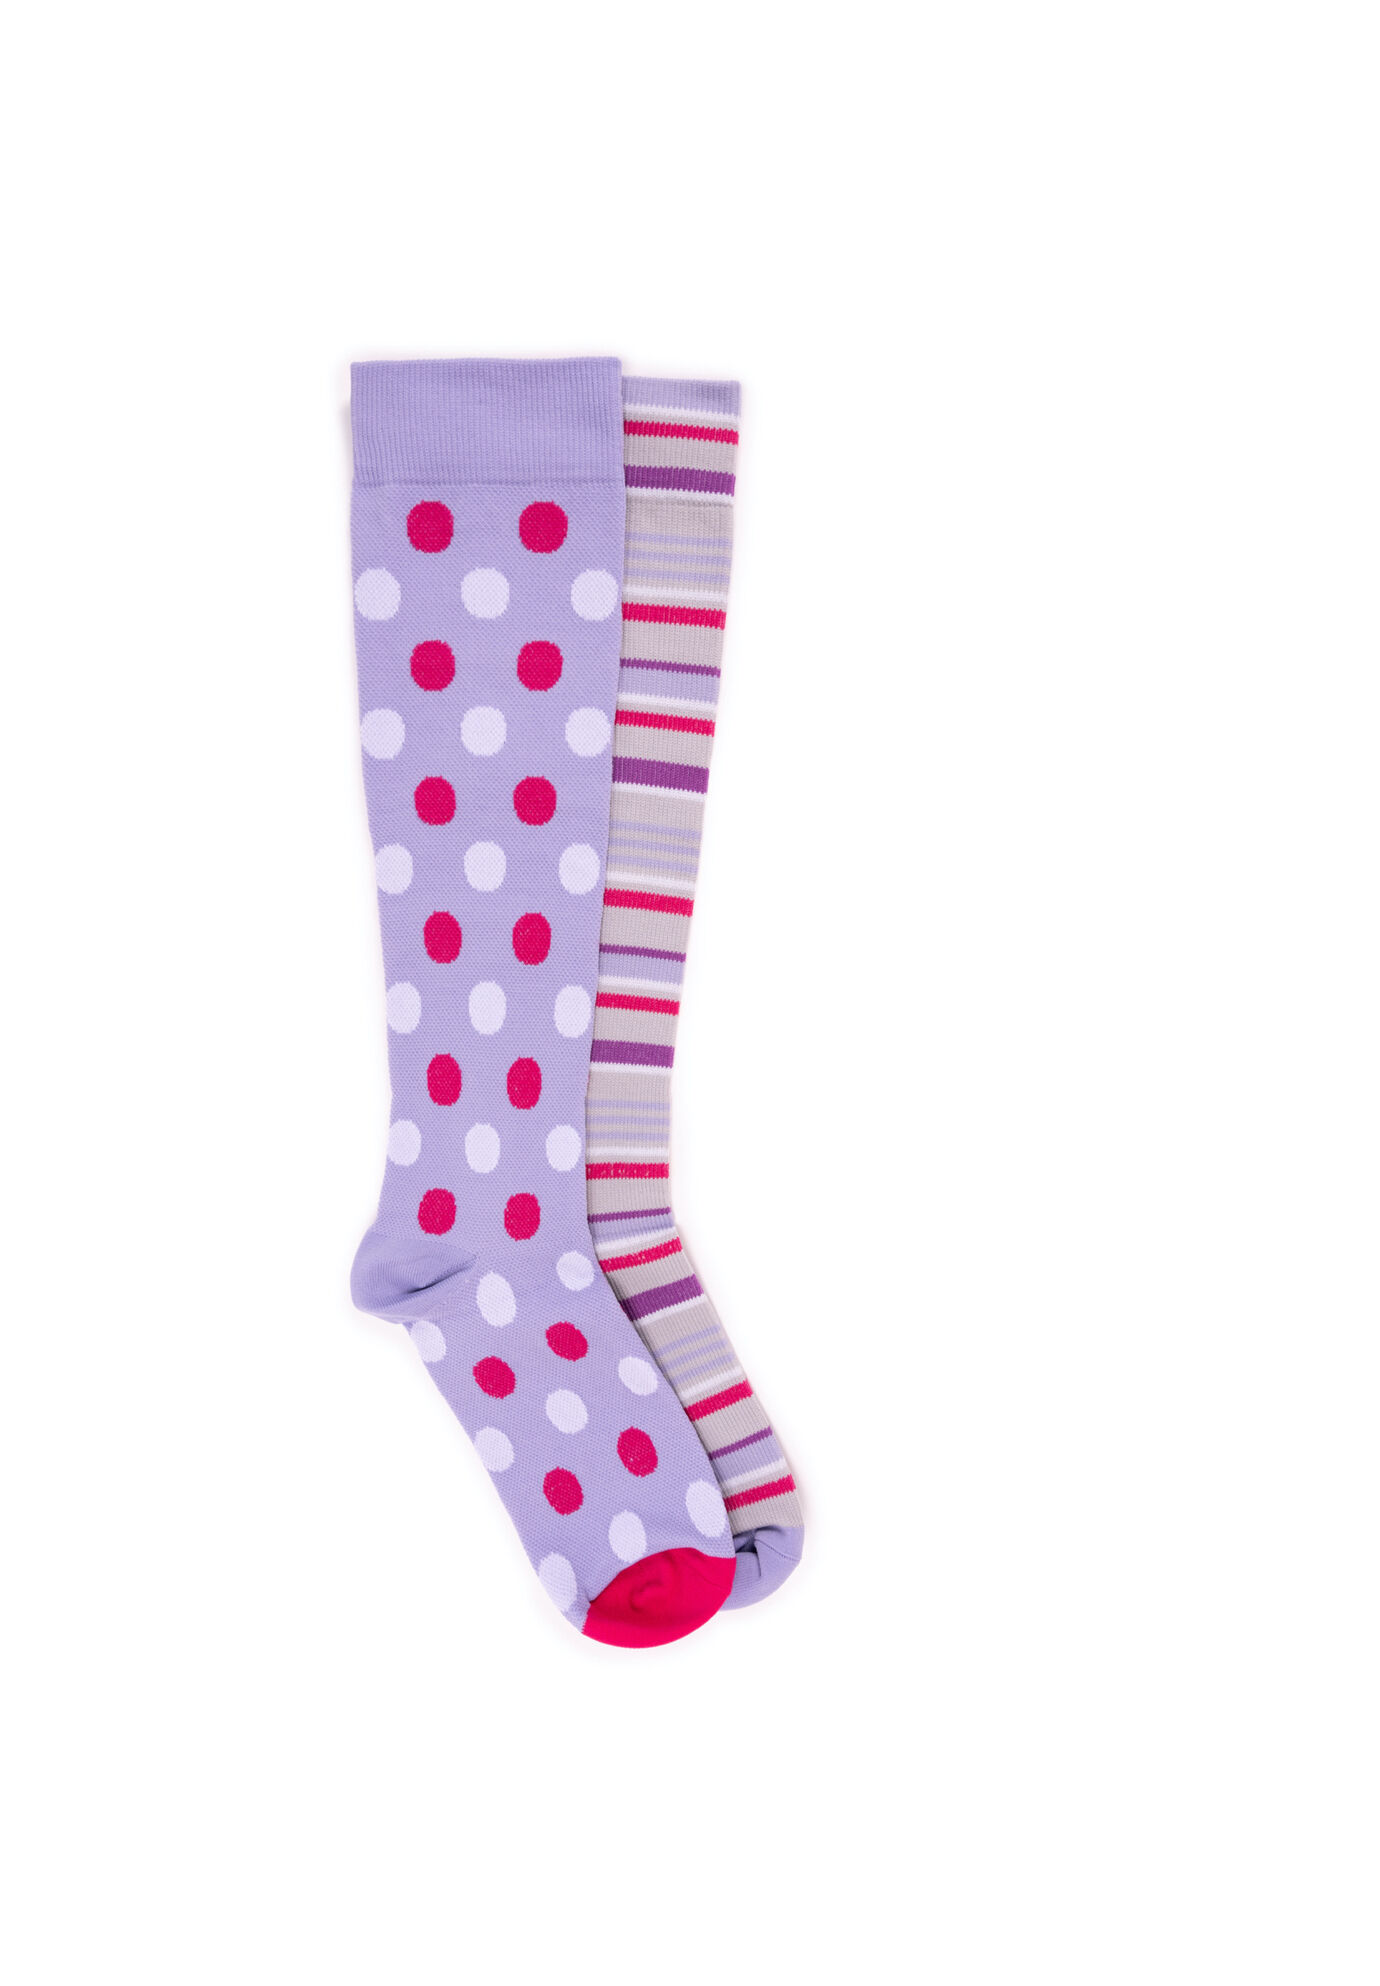 Women's 2 Pair Pack Compression Socks by MUK LUKS in Lavender (Size S/M)